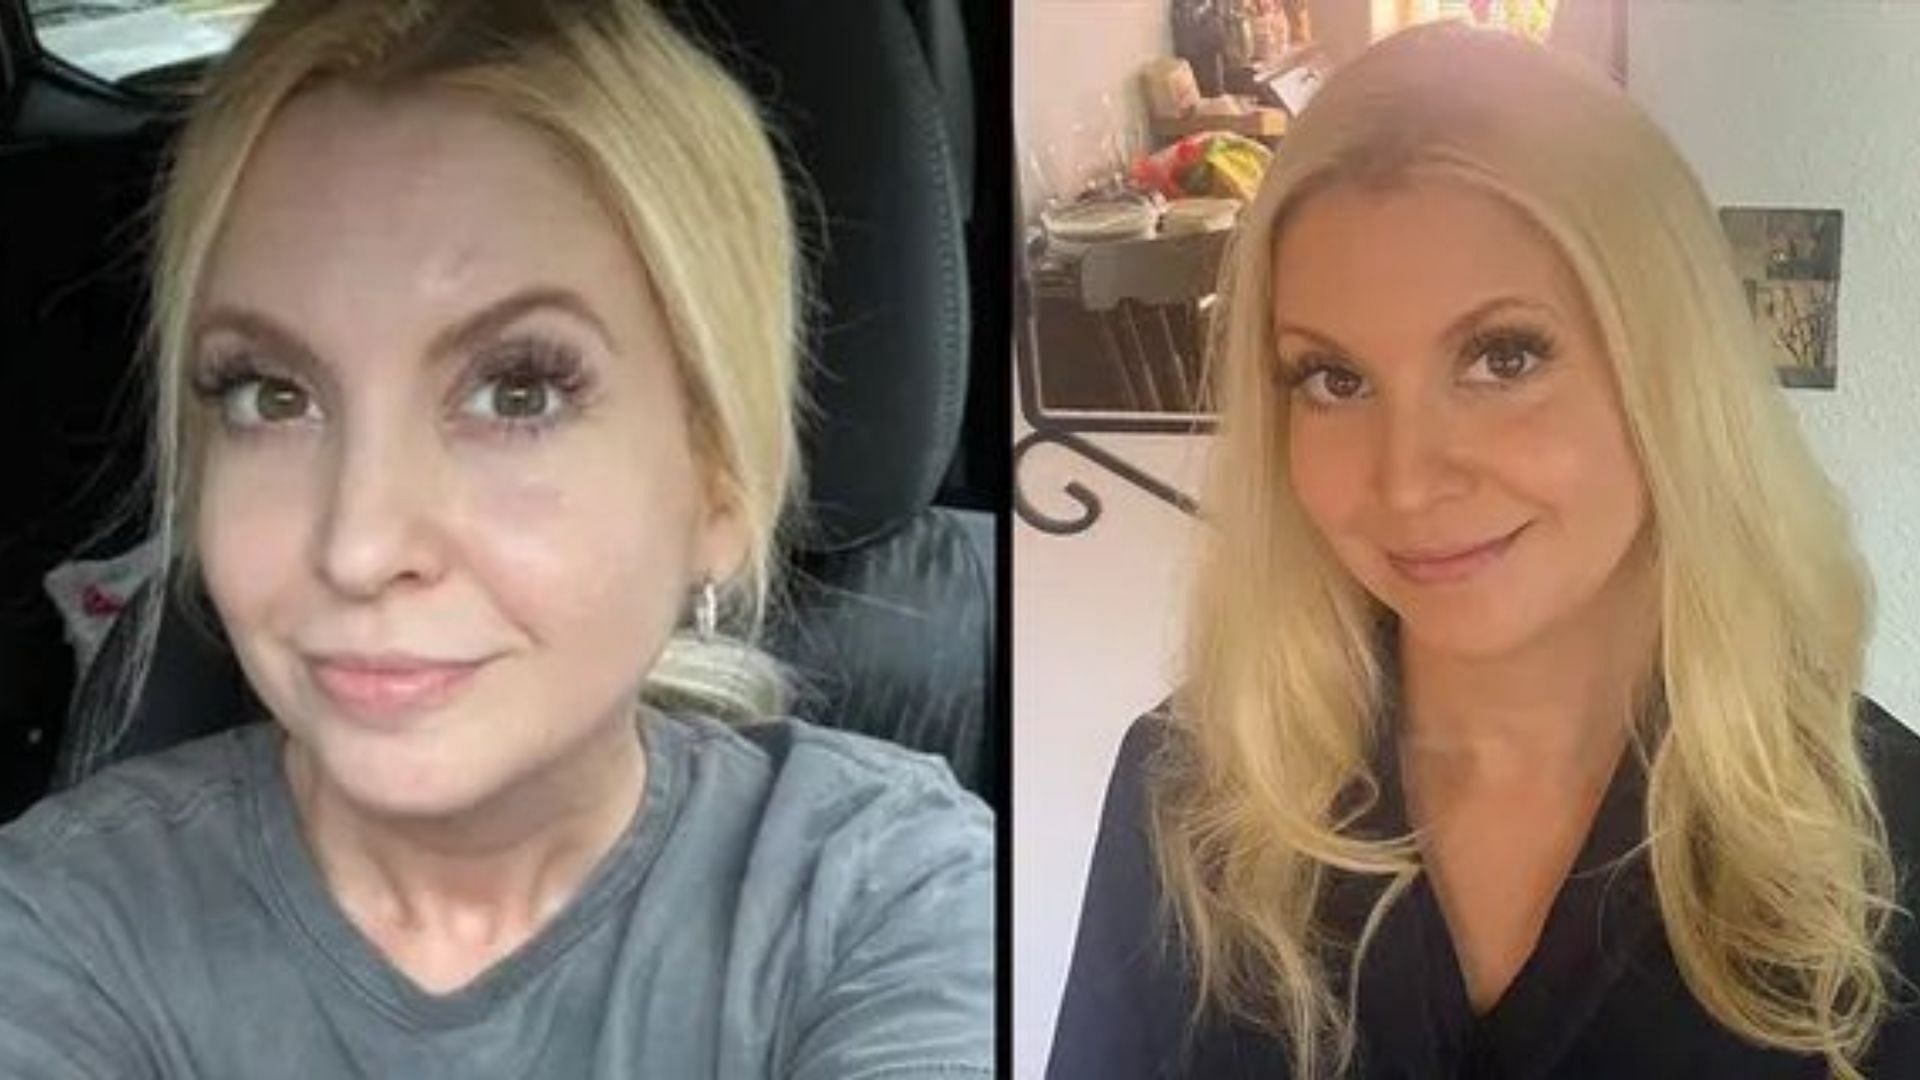 Texas mother of two was found dead inside her car weeks after her disappearance (Images via Twitter)